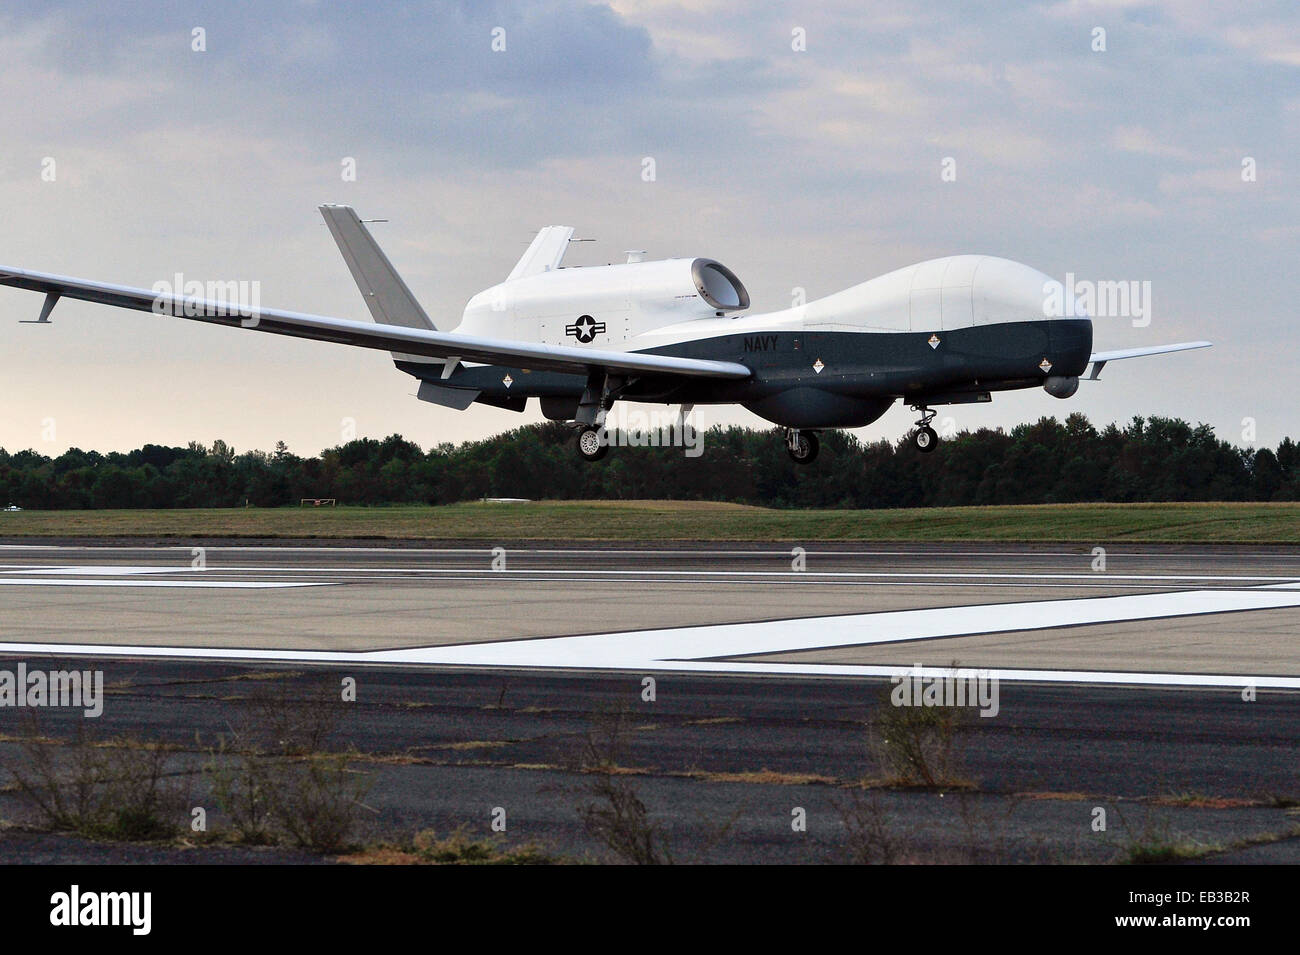 A US Navy MQ-4C Triton Unmanned Aircraft System lands at Naval Air Station Patuxent River following the first cross country flight September 18, 2014 in Patuxent River, Maryland. Stock Photo